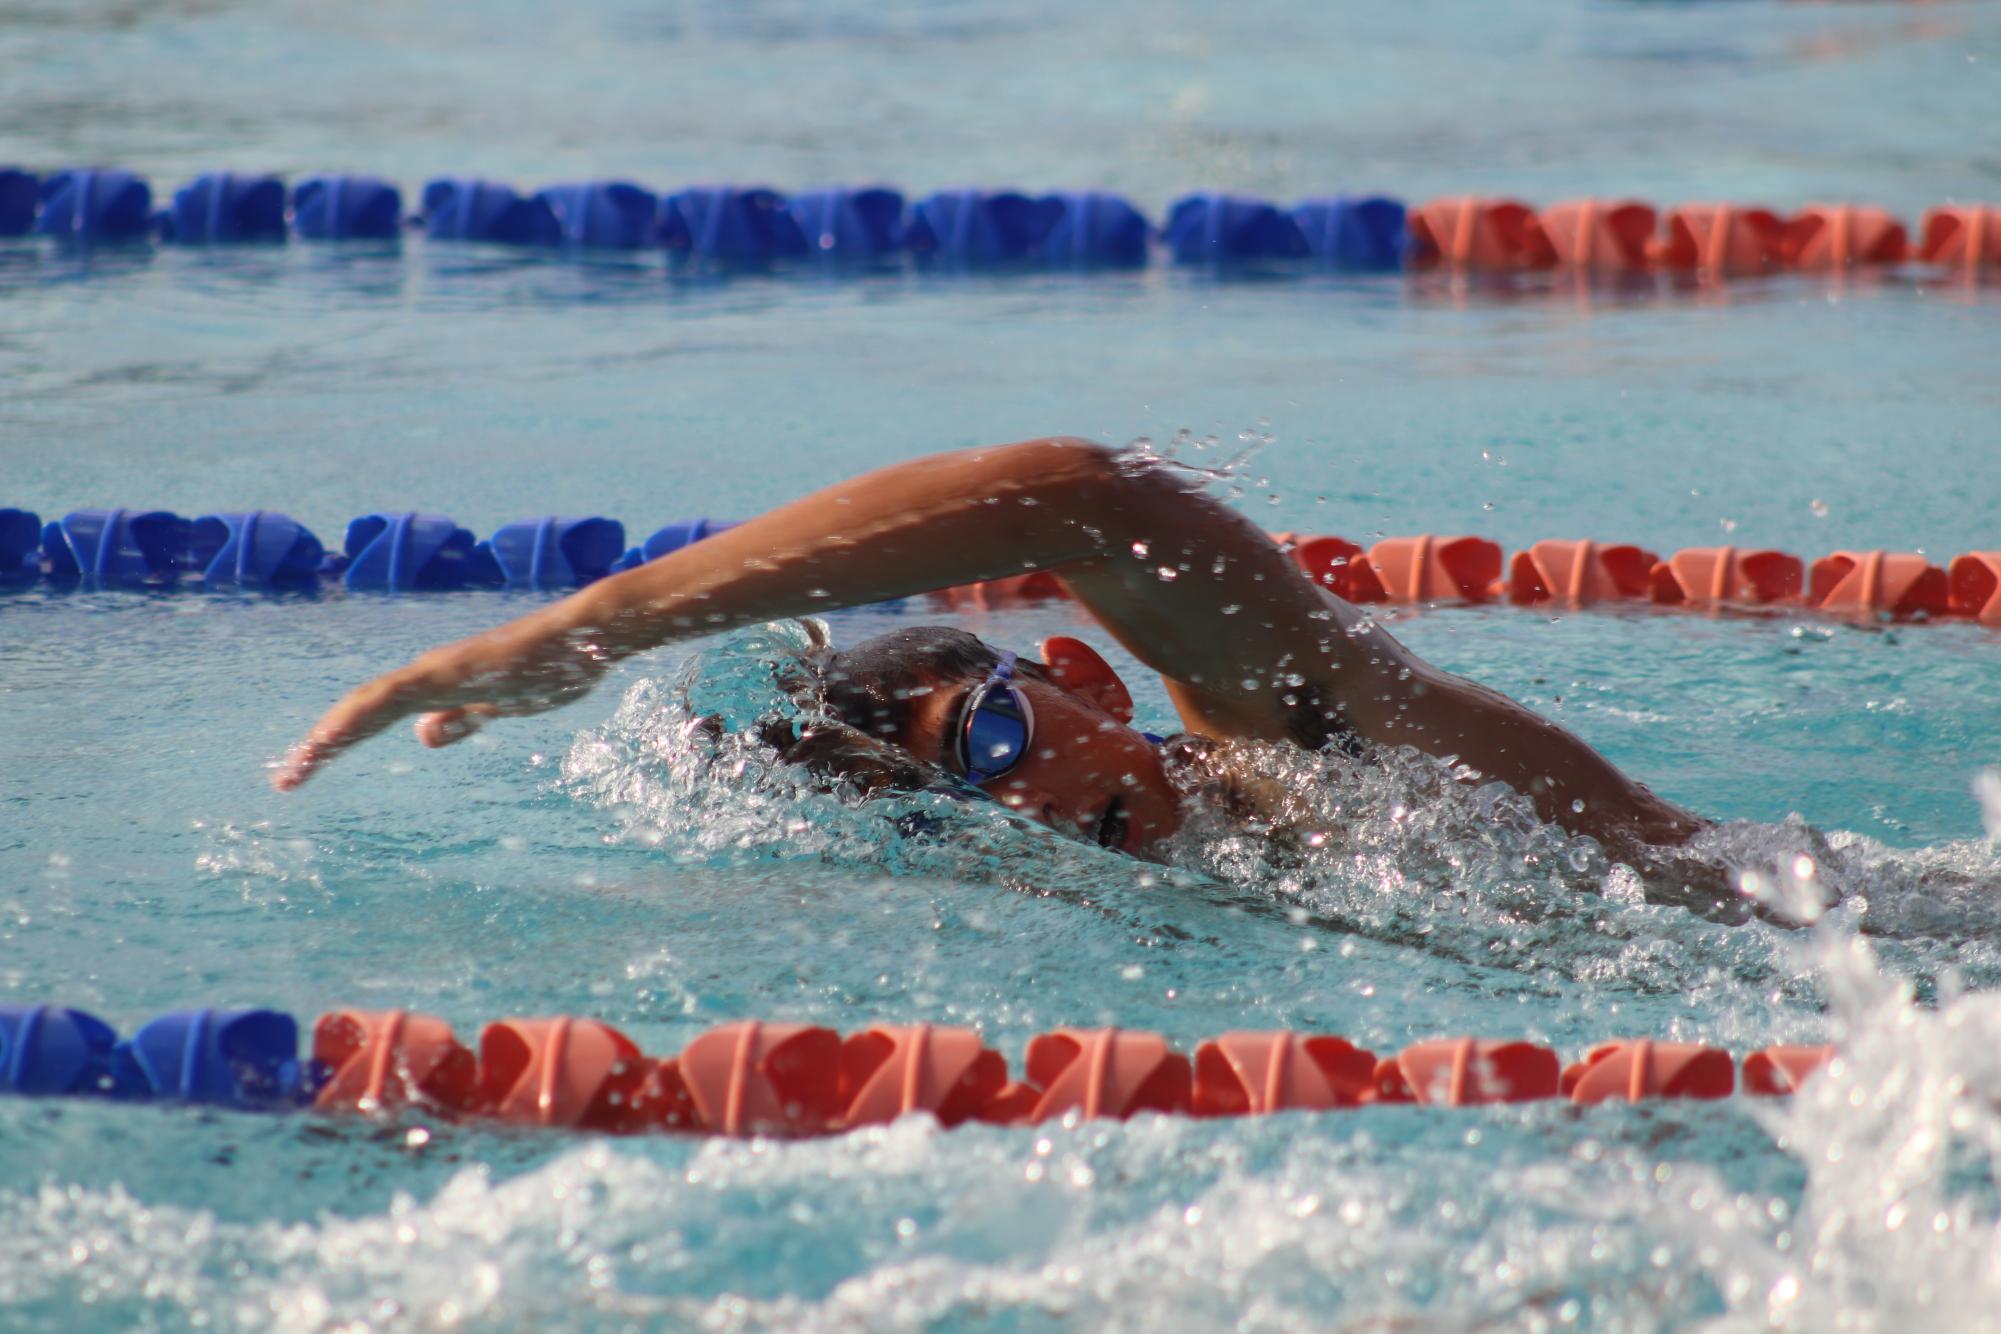 Cape High’s swim and dive team is on another winning streak